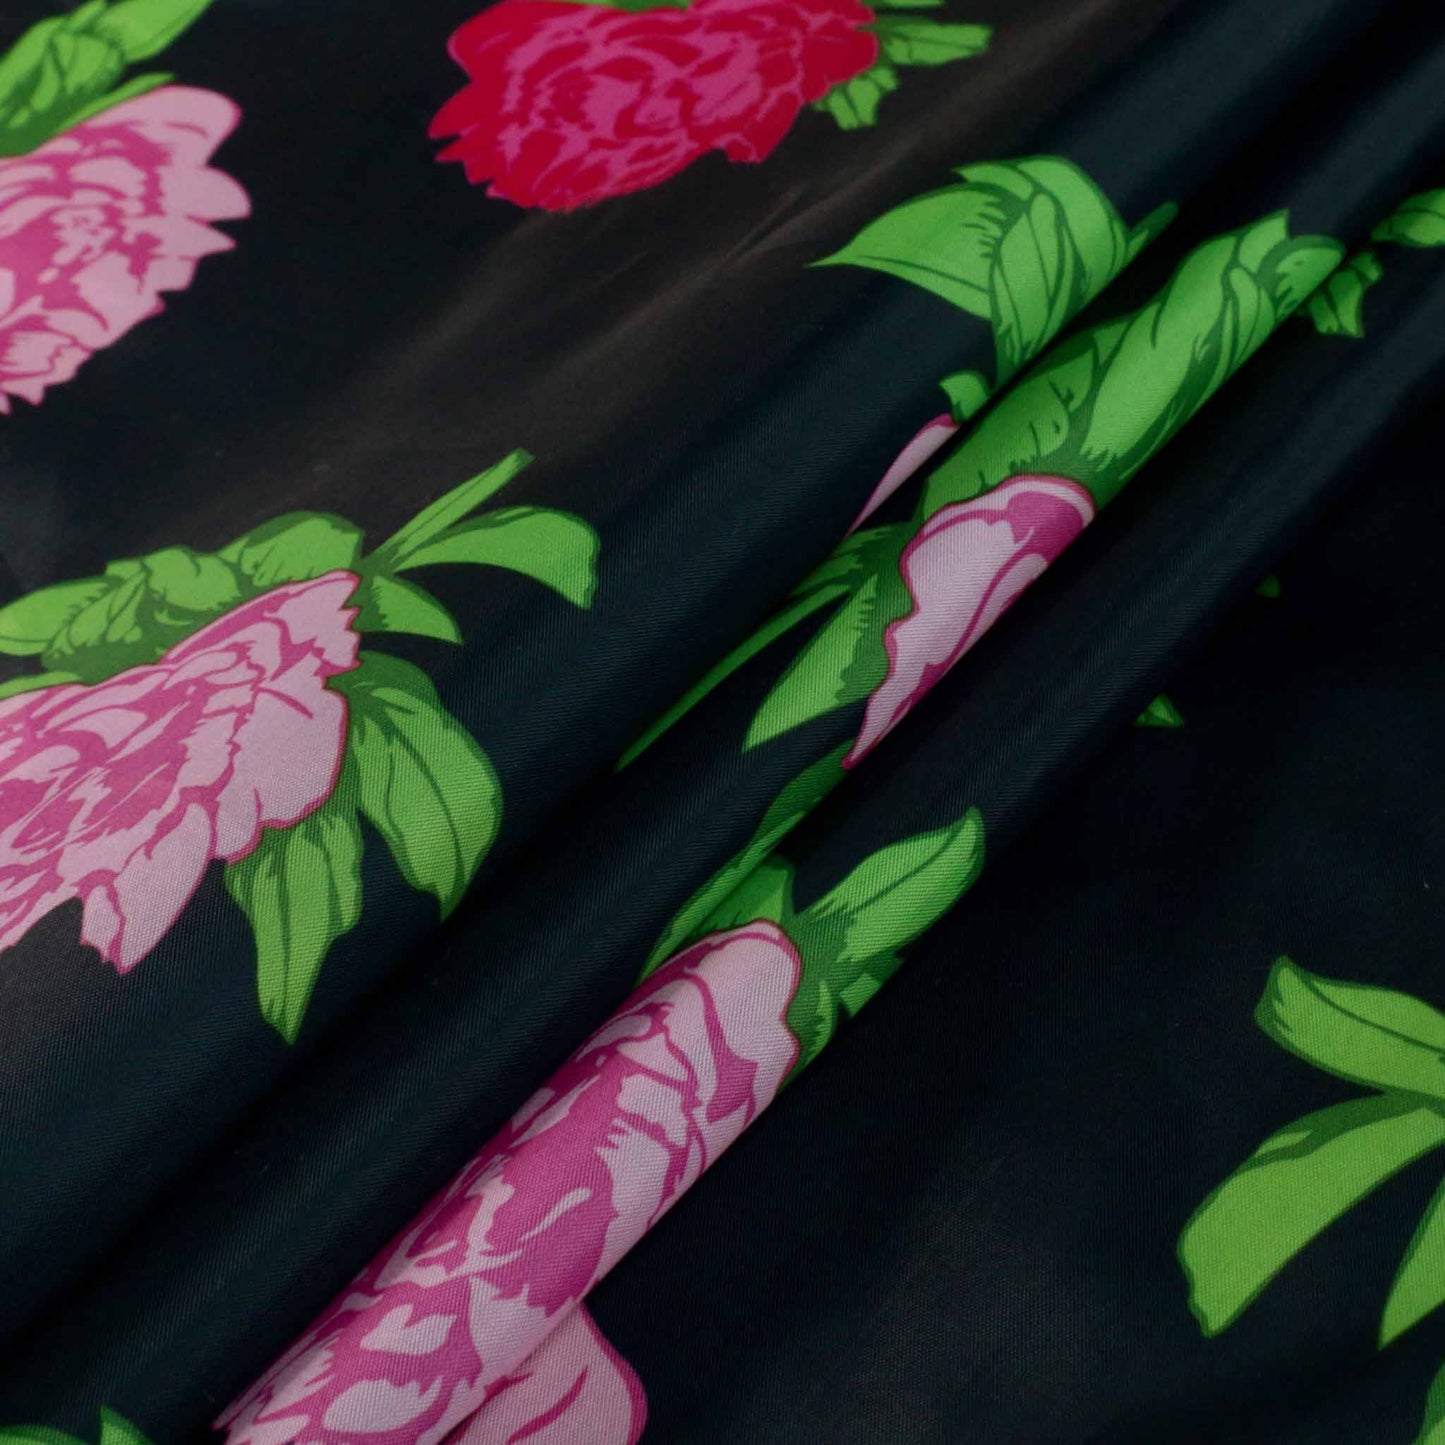 pink roses printed on black polyester lining fabric for dressmaking